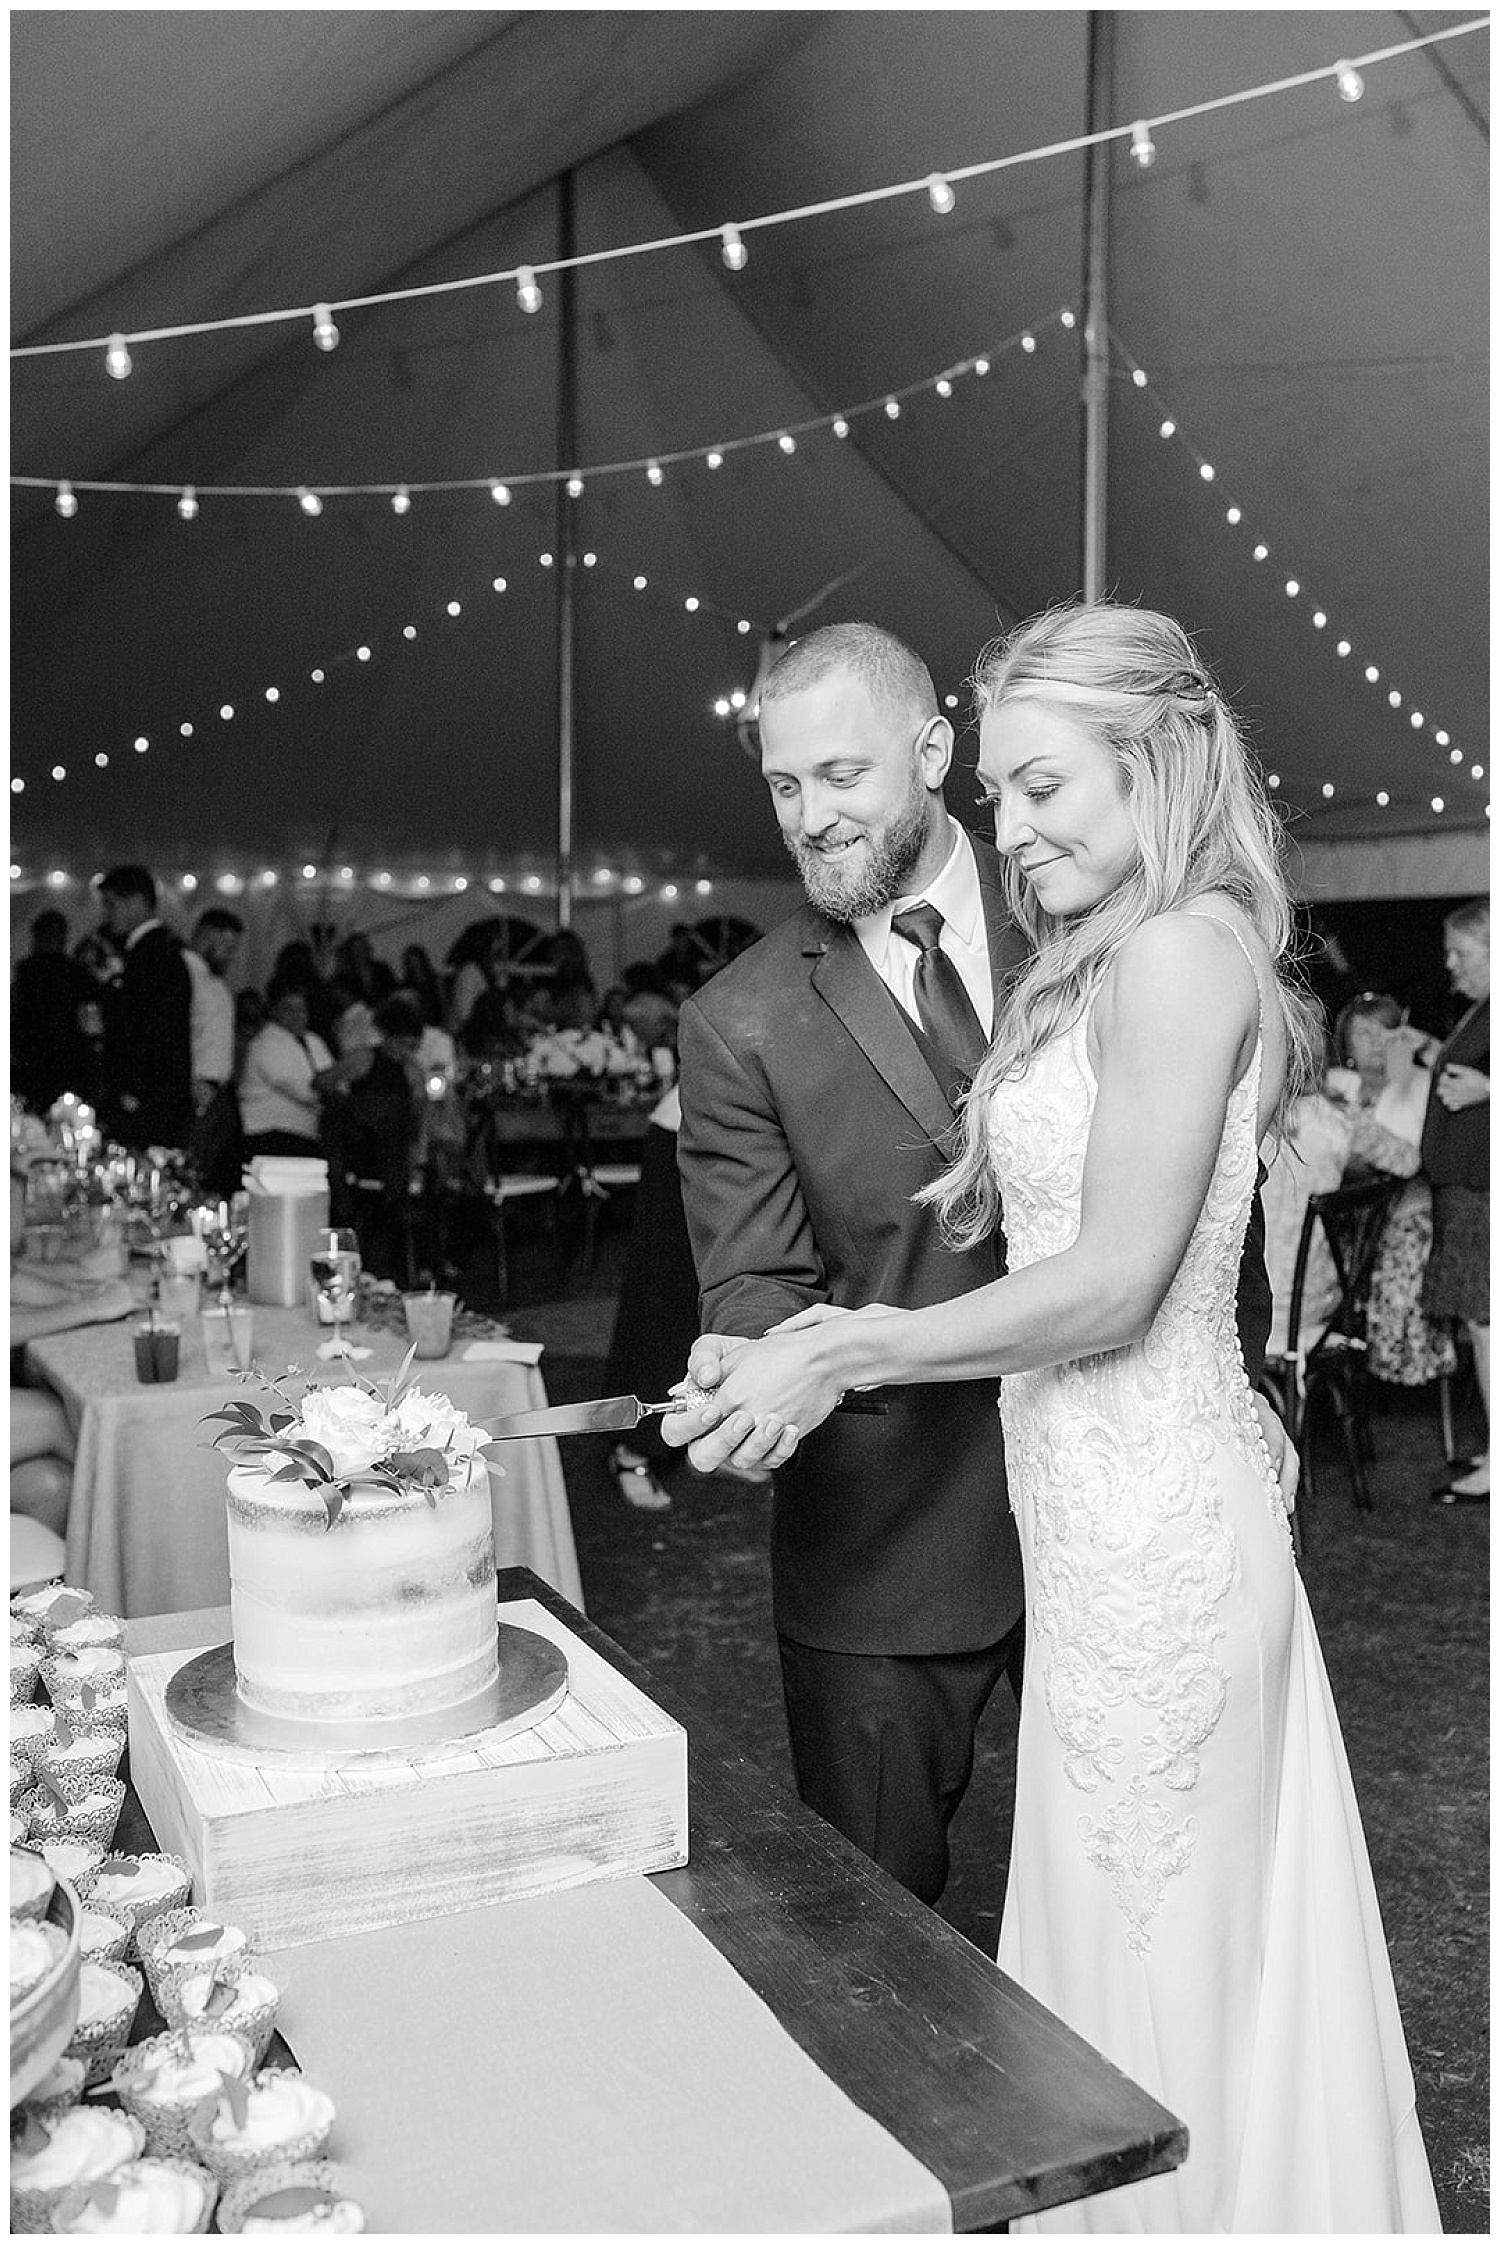 bride and groom cutting cake at wedding